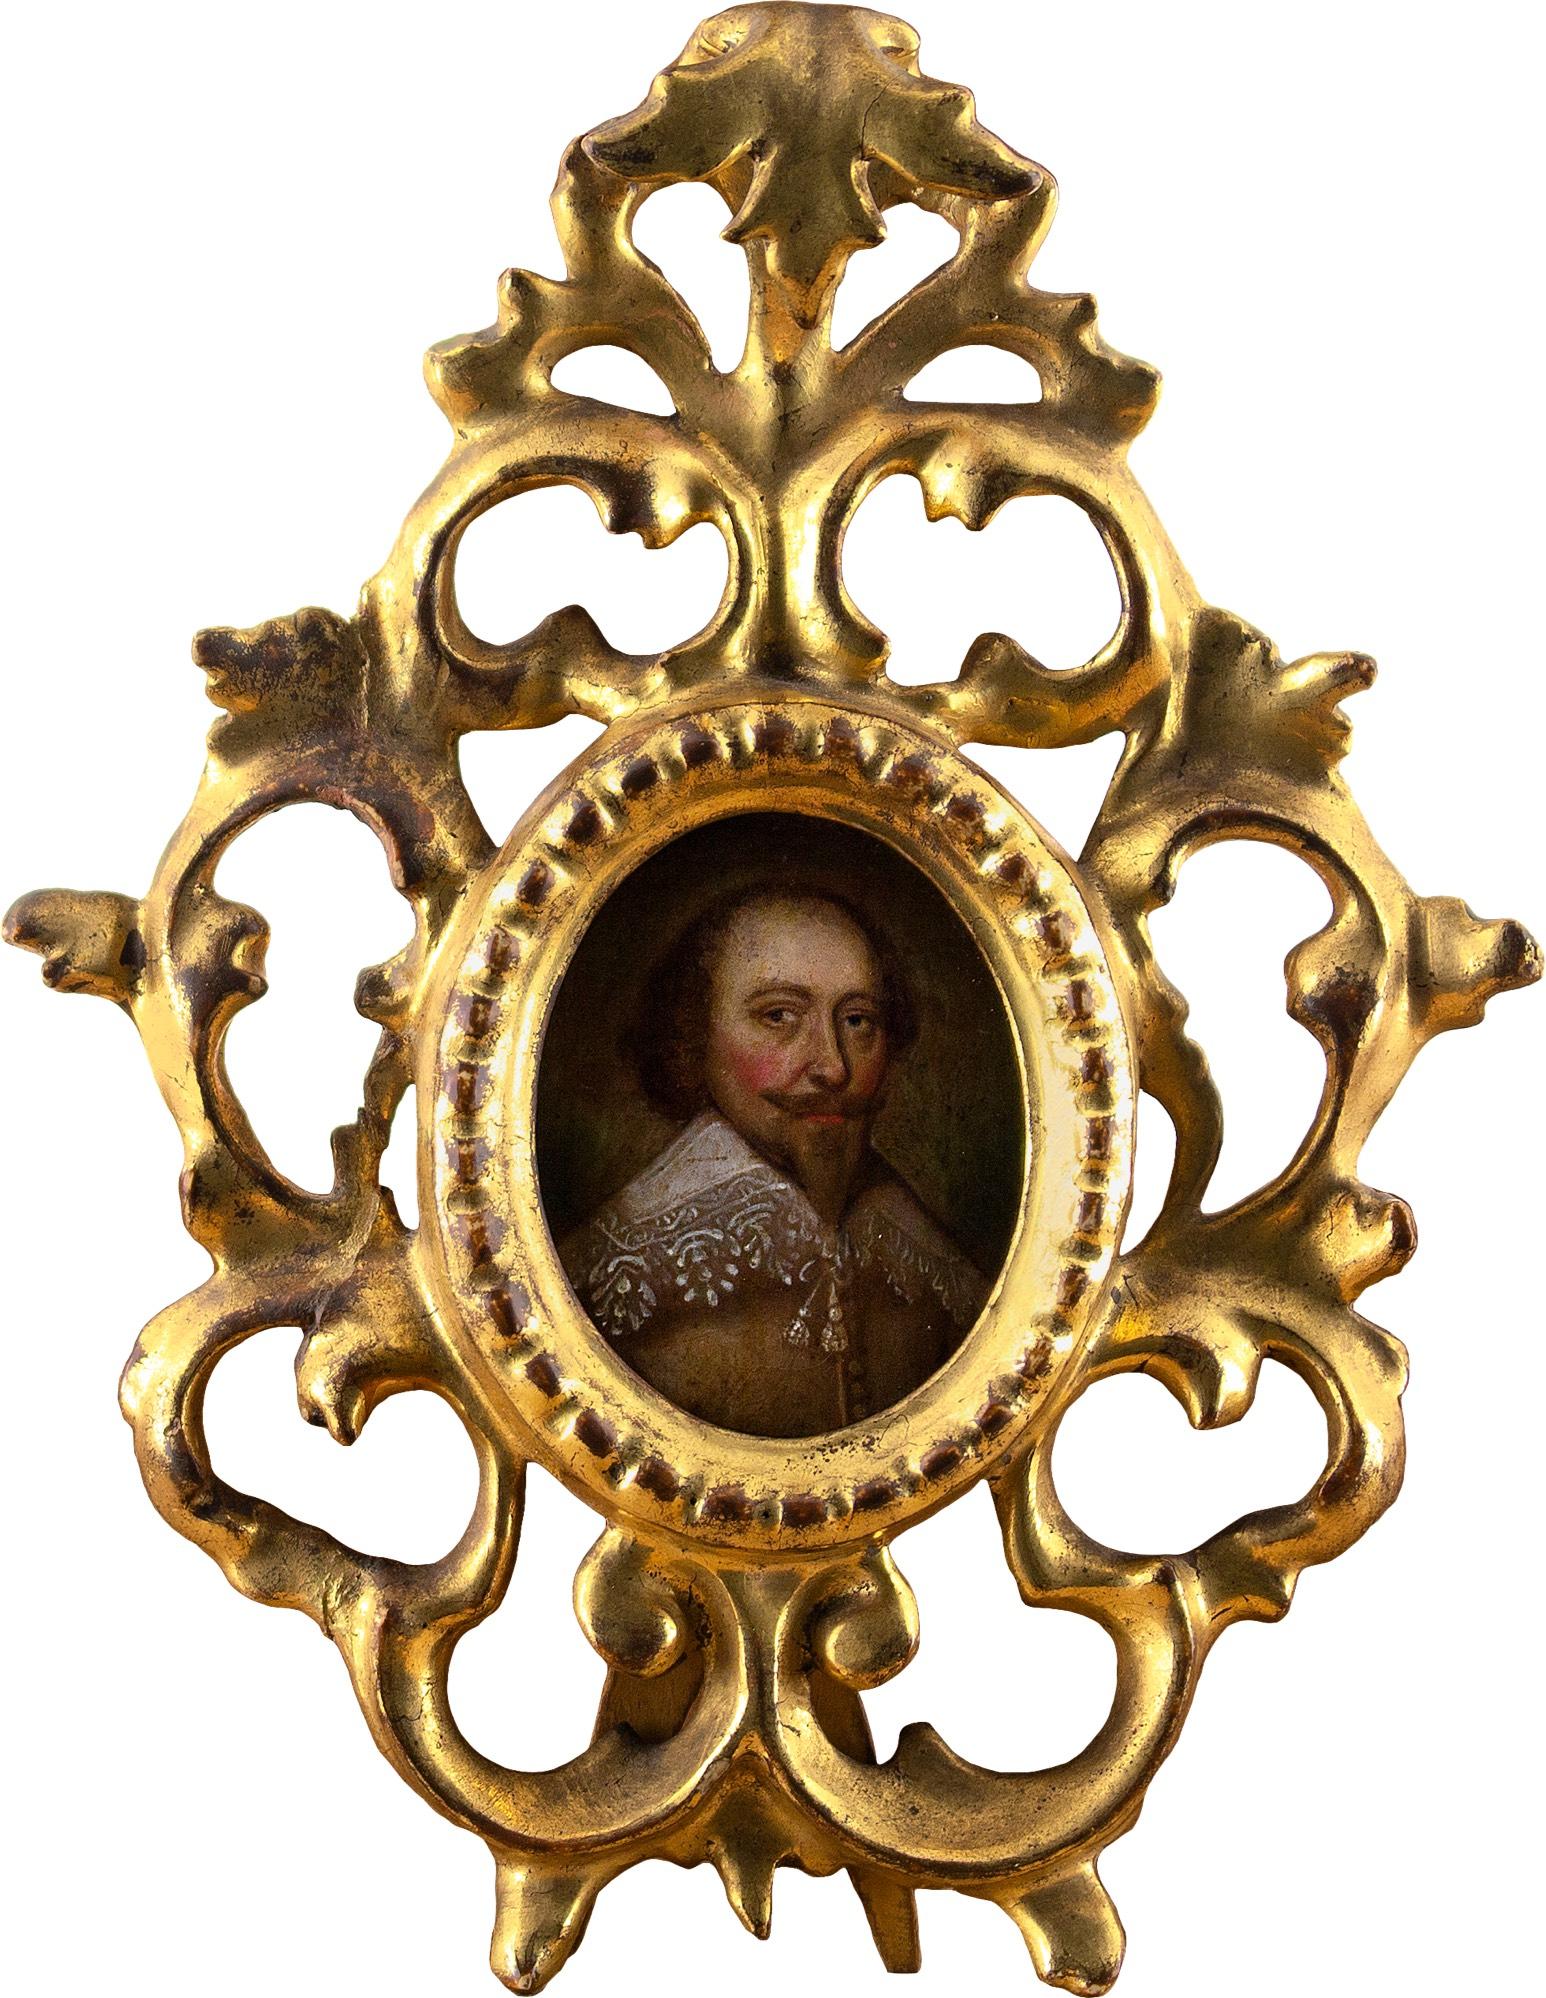 17th-Century English School, Portrait Miniature Of King Charles I, Oil On Copper